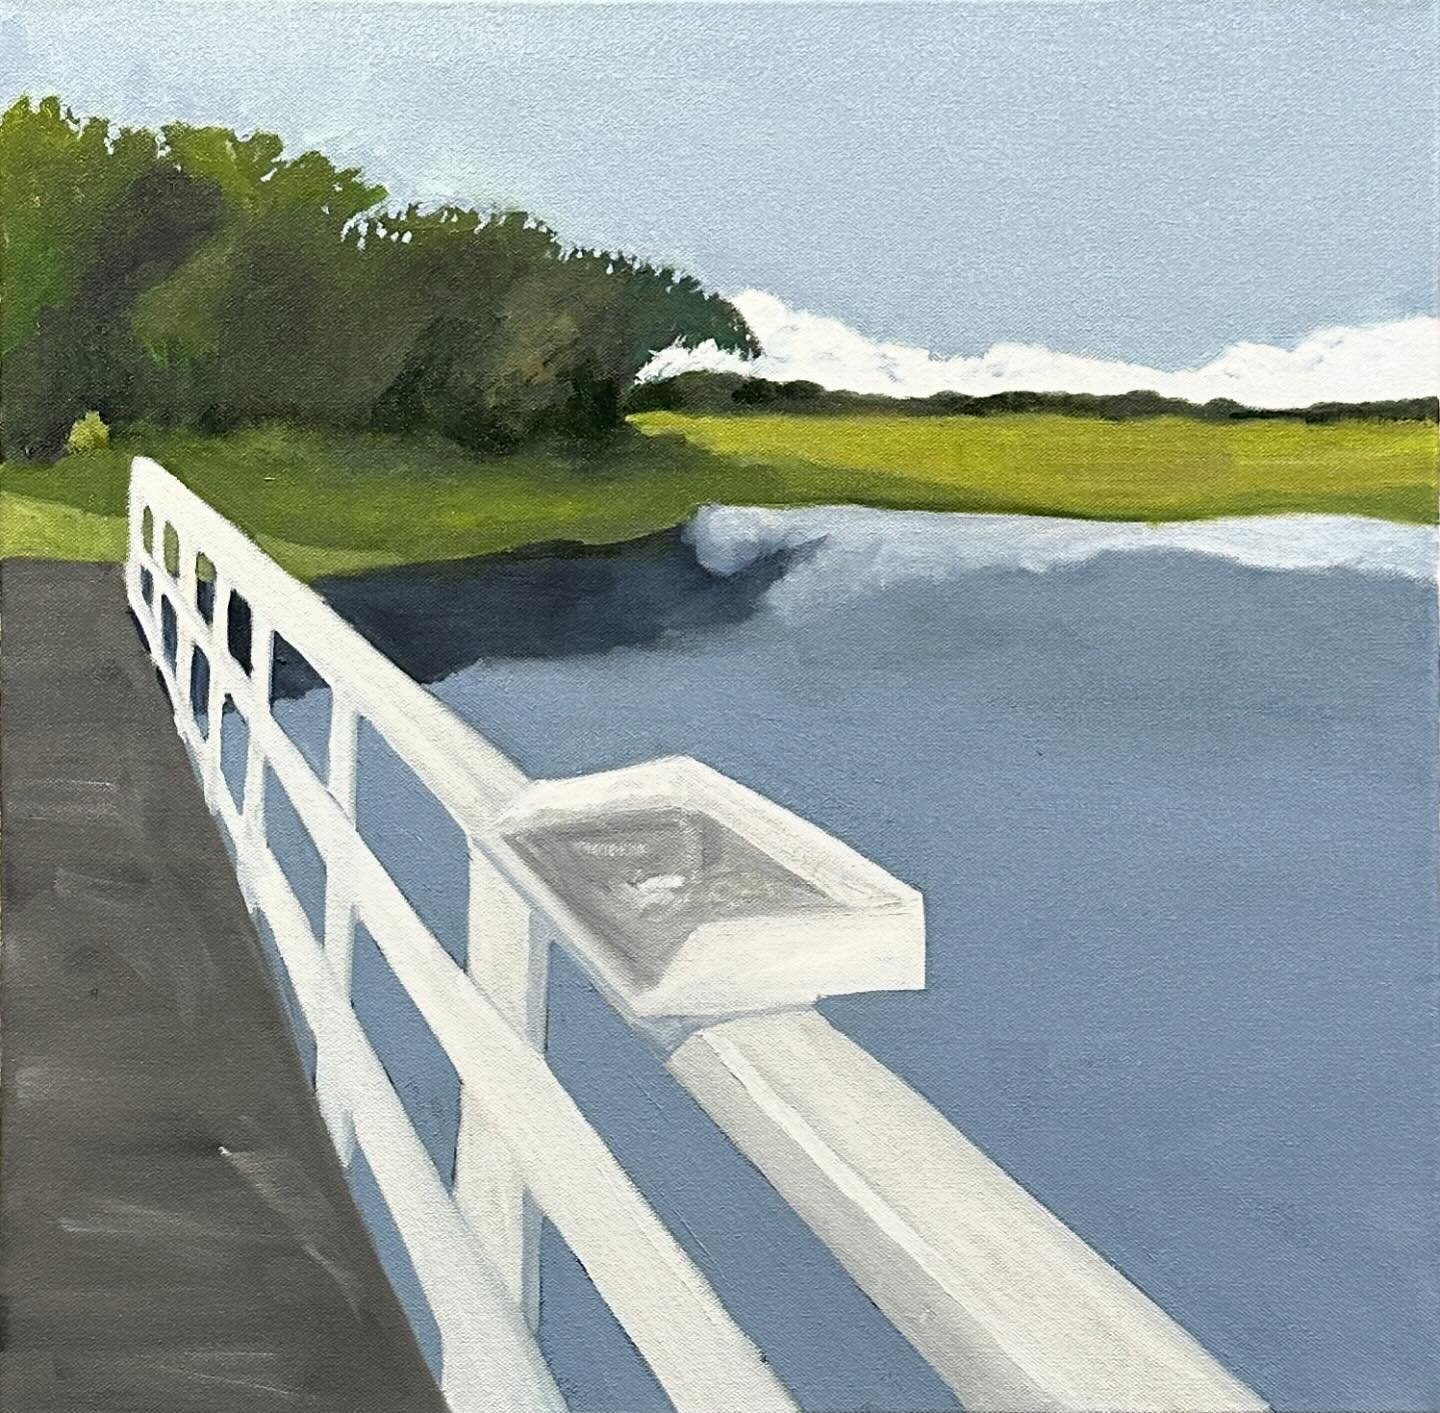 A fish cleaning station on a pier in the low country - Beaufort SC.  Obviously a lot of fish guts have rested on this shelf!  The marshes remind me of our own great marsh in Essex County.  18 x 18 oil on canvas.  #lowcountry #pier #fishinglife #rever